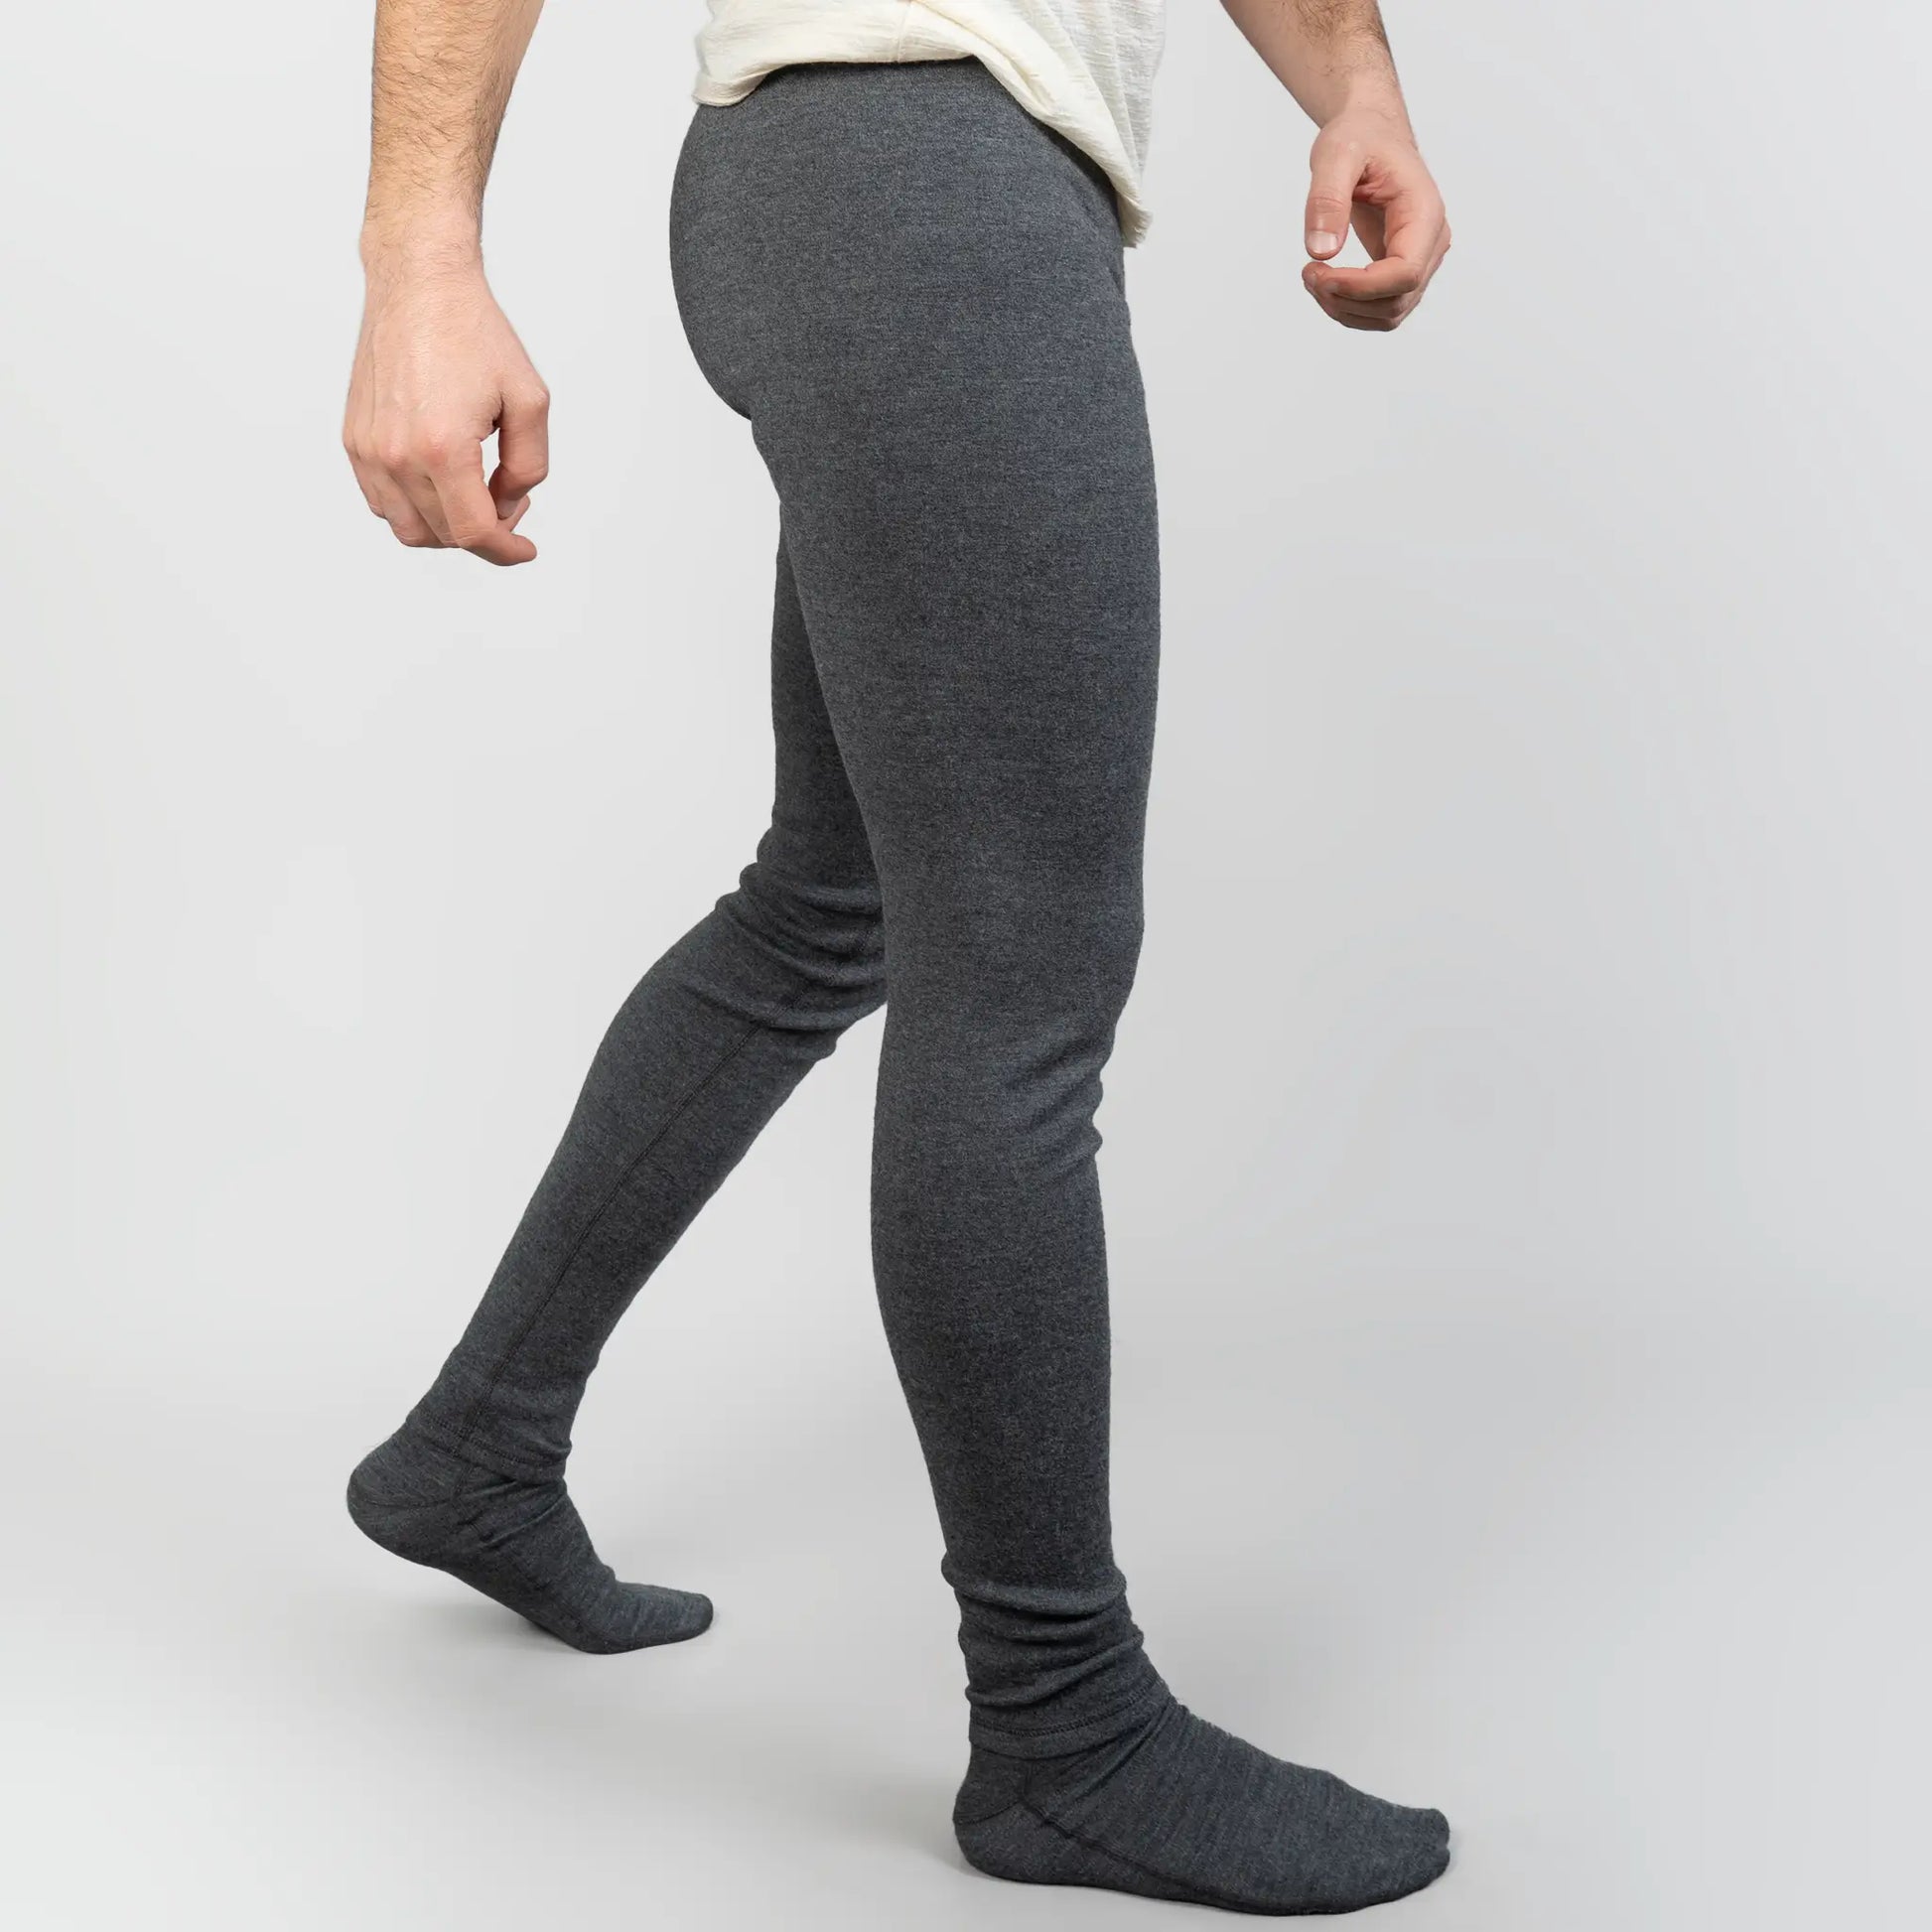 mens eco friendly leggings midweight color gray